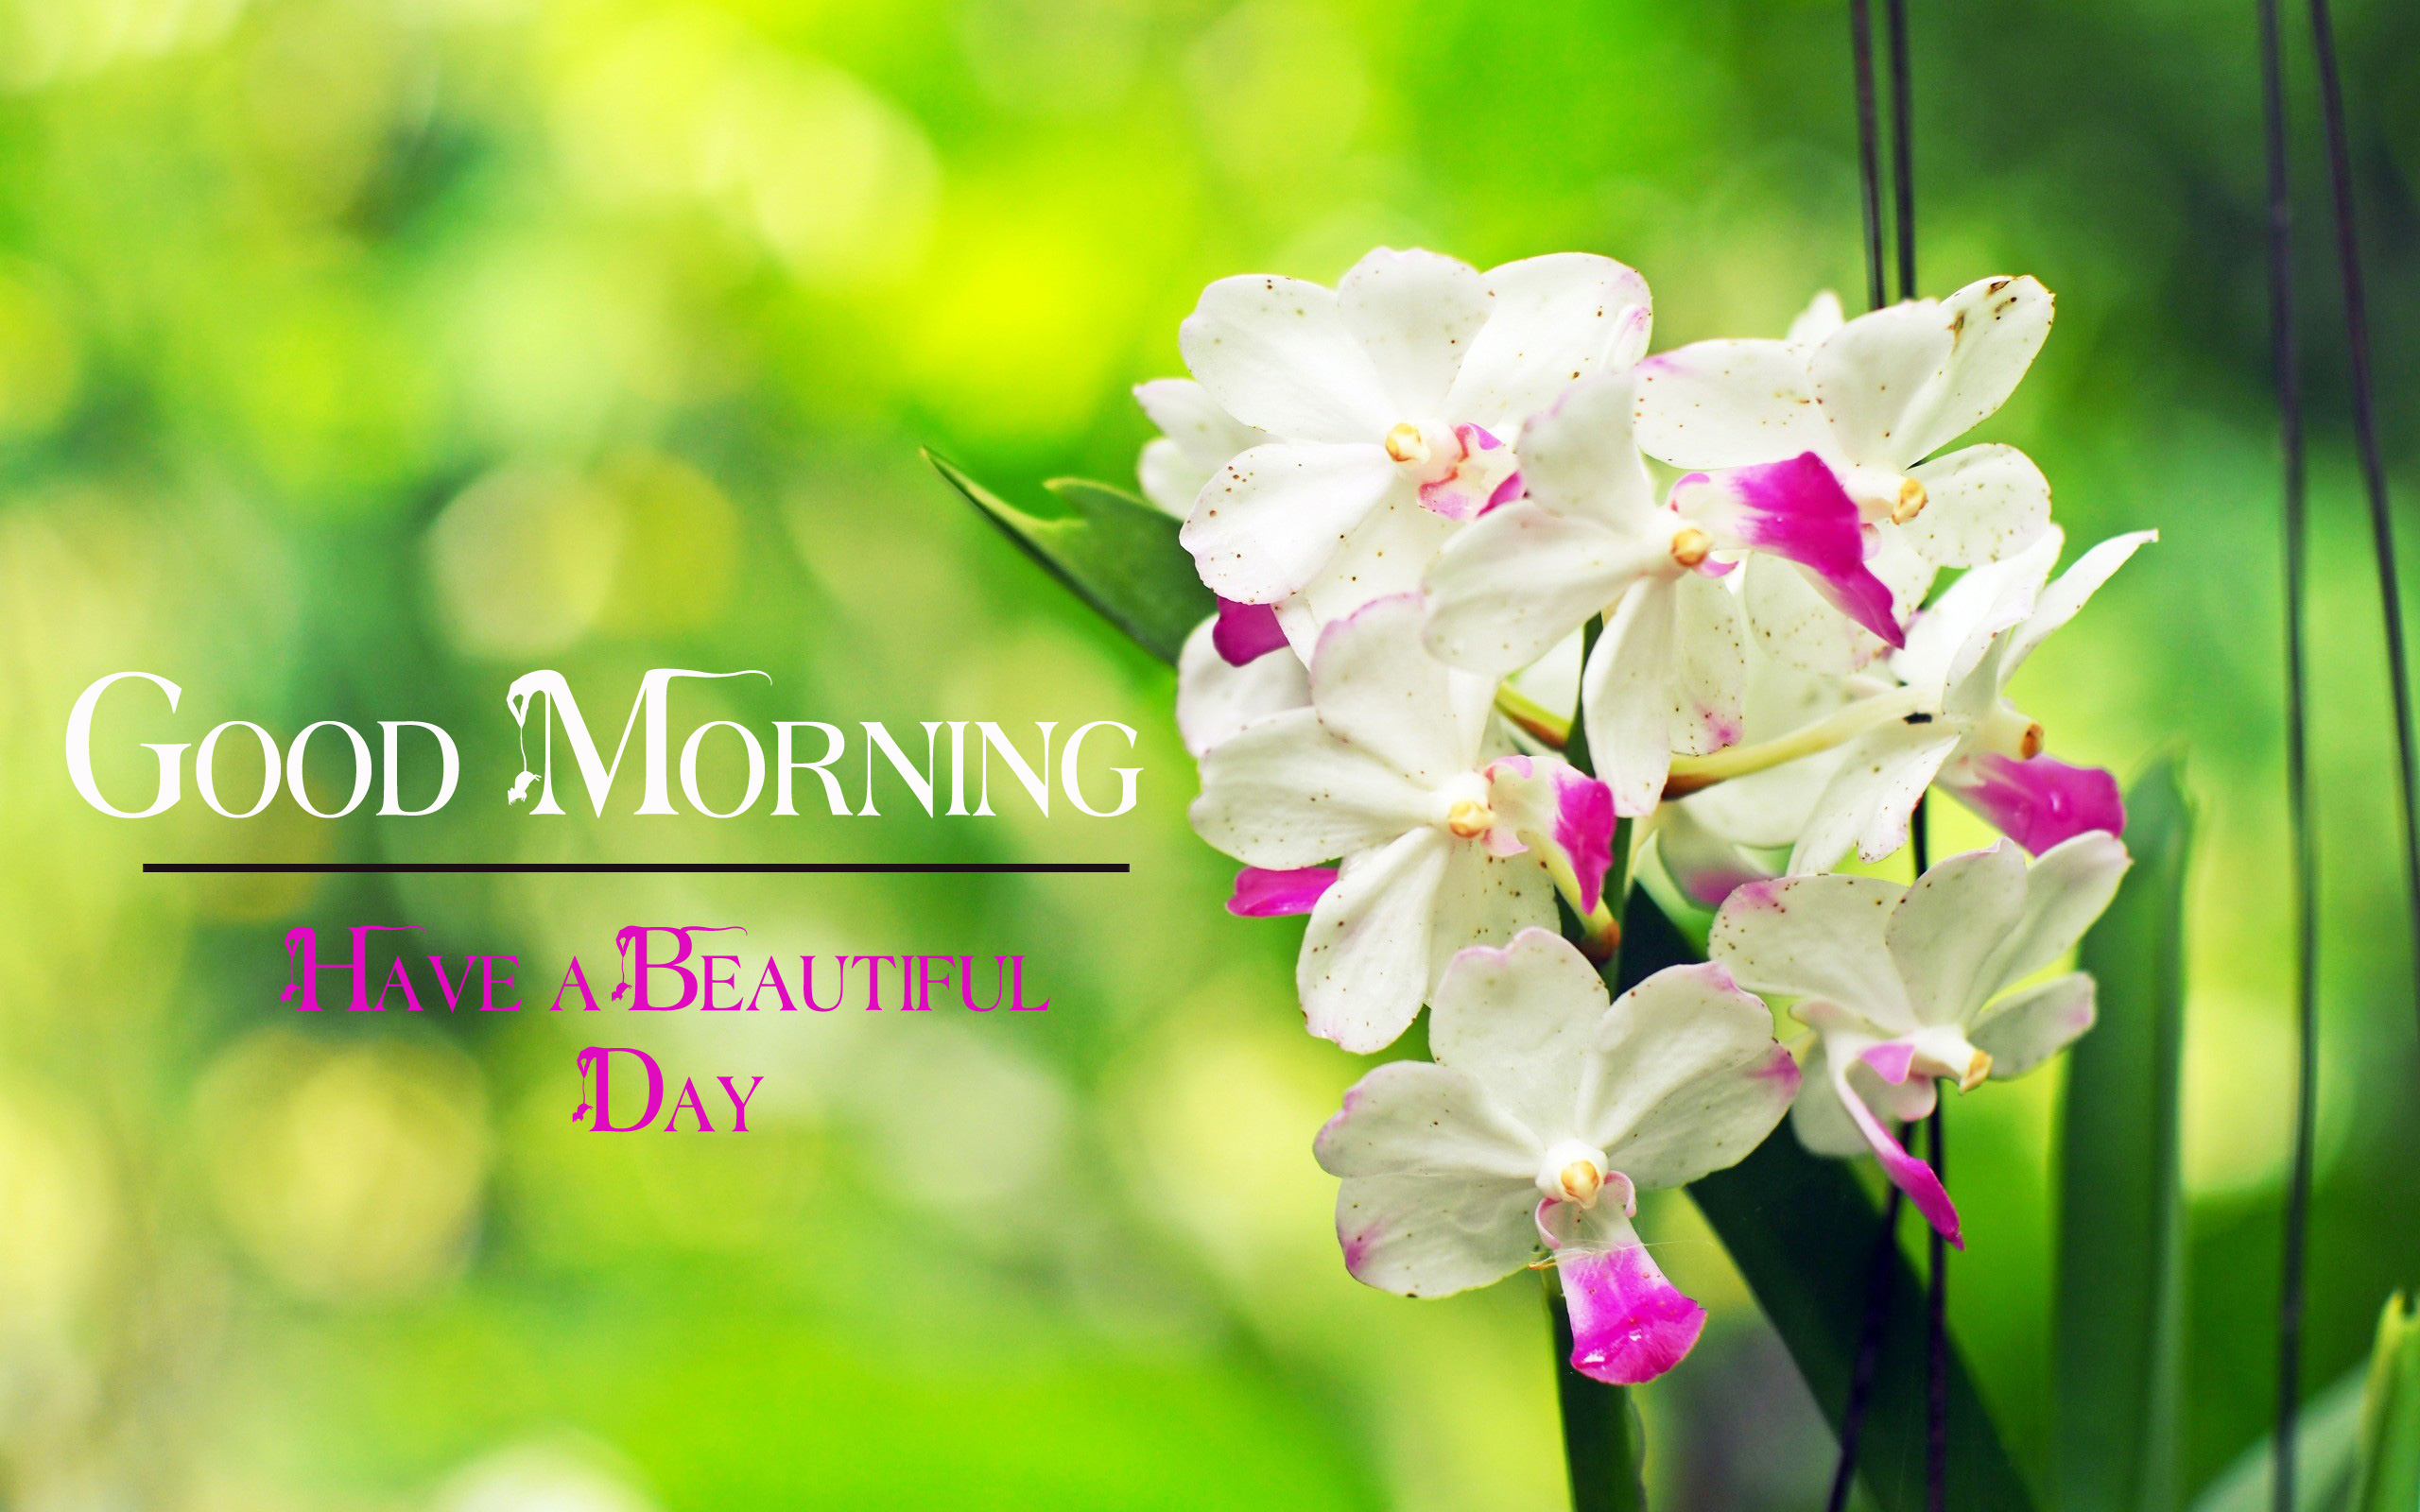 good morning images wallpaper photo free hd download